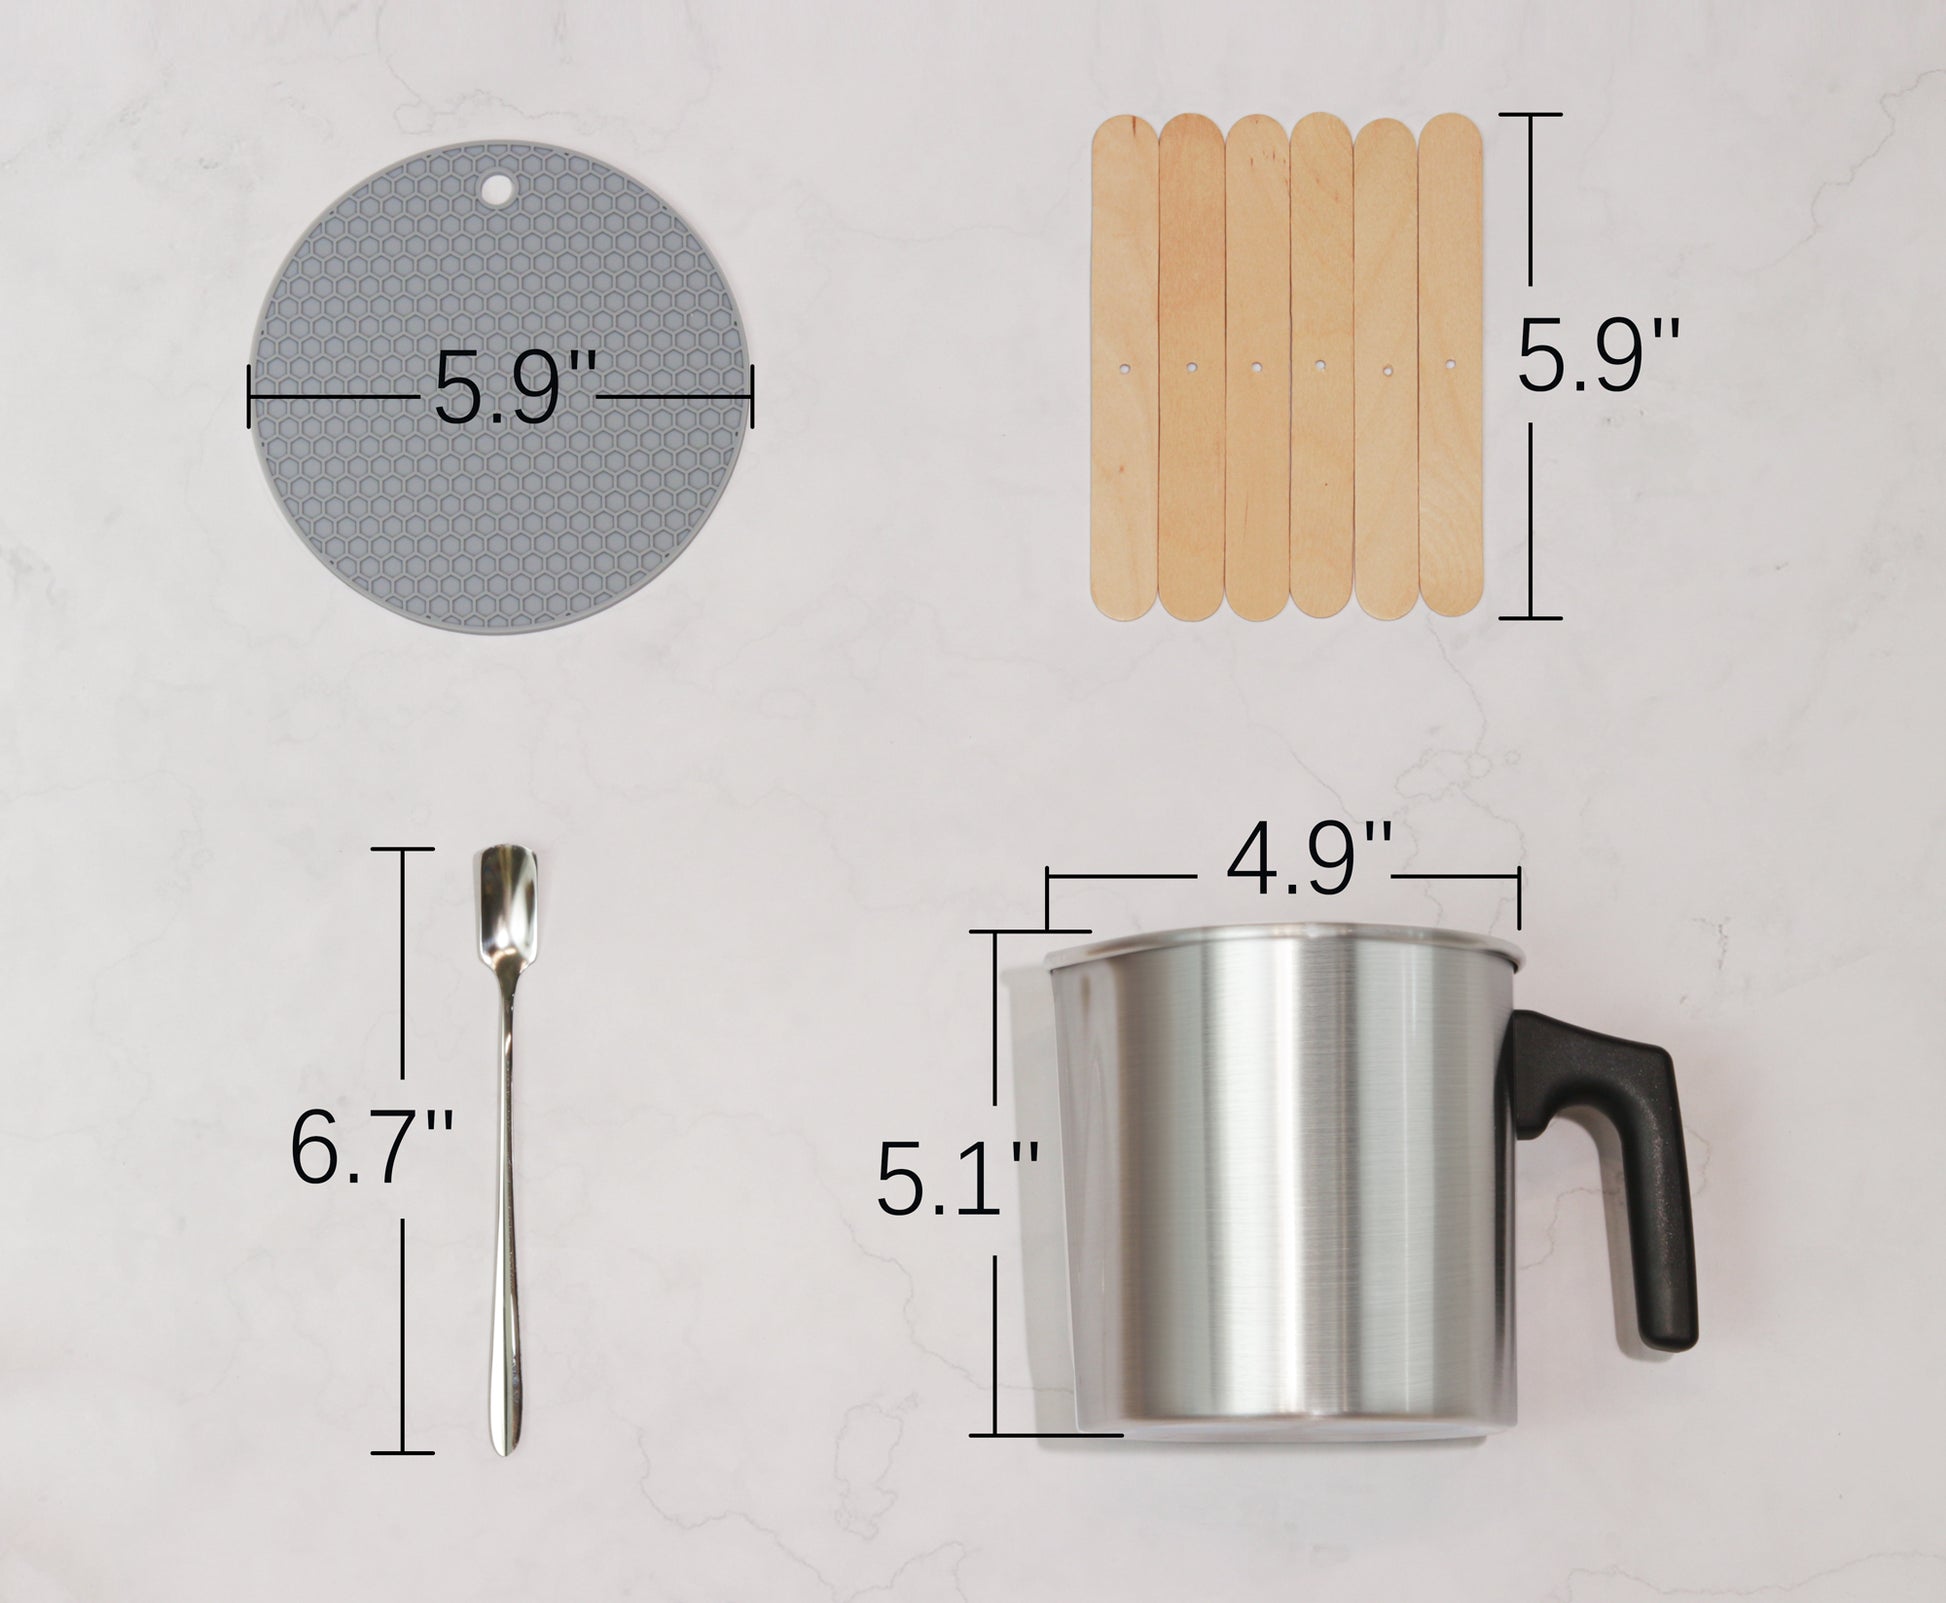 Candle Pouring Pot w/ Measurements - 2L Stainless Steel